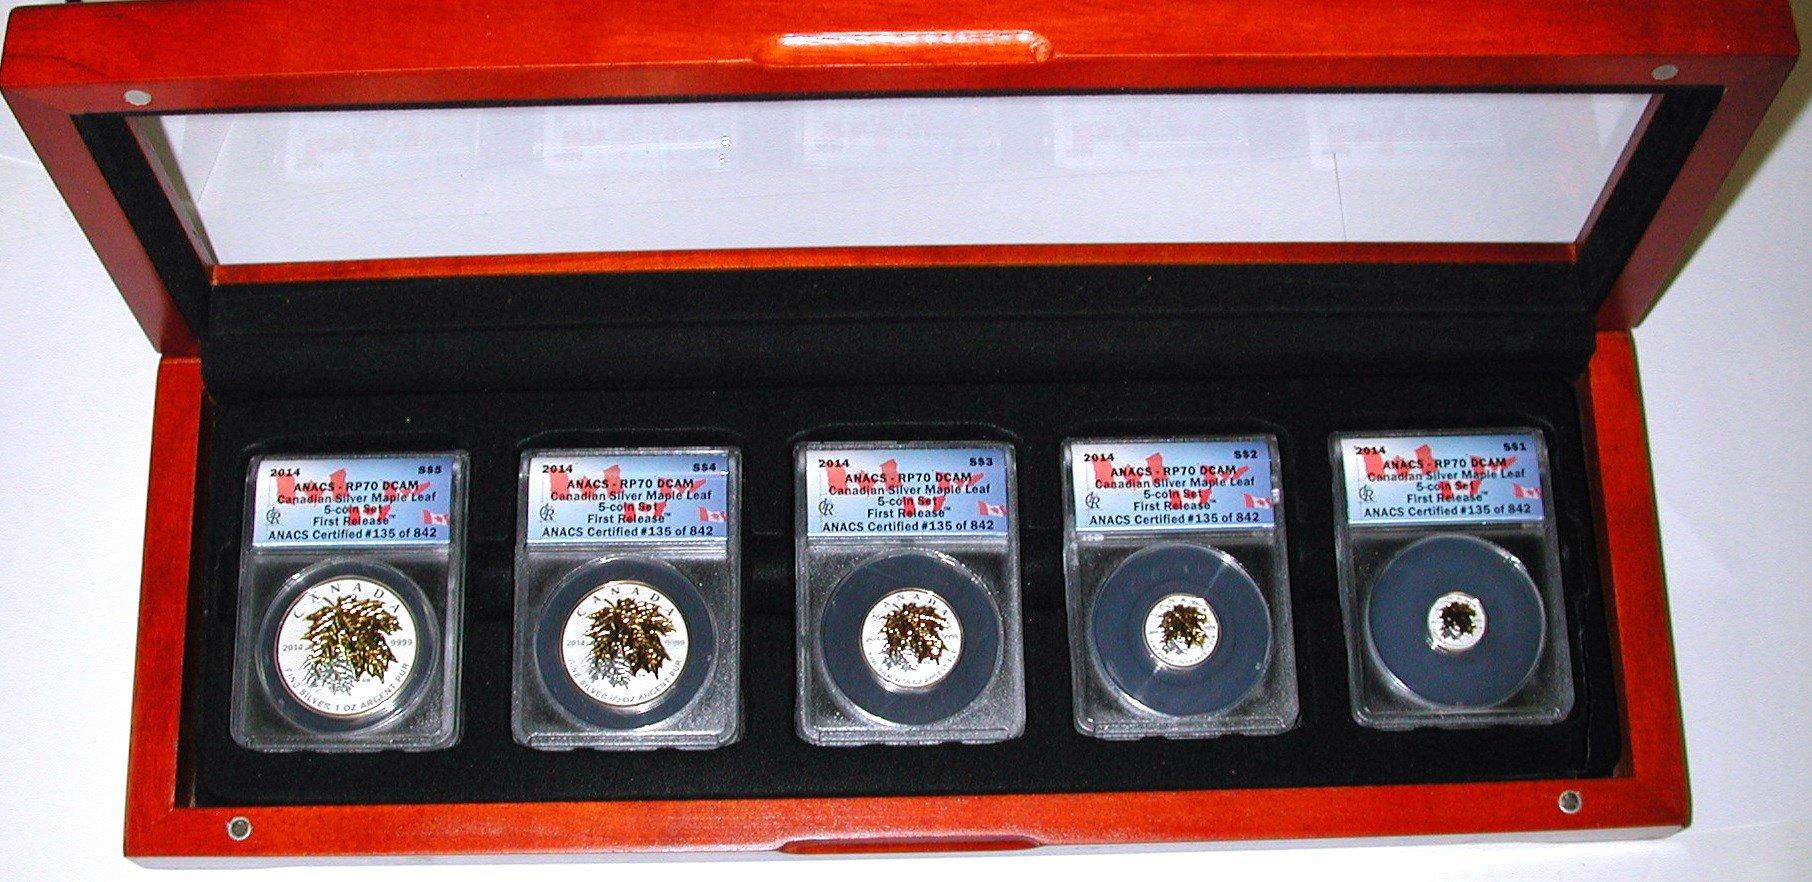 CANADA - 2014 FIVE-COIN SILVER MAPLE LEAF SET - ANACS RP70 DCAM